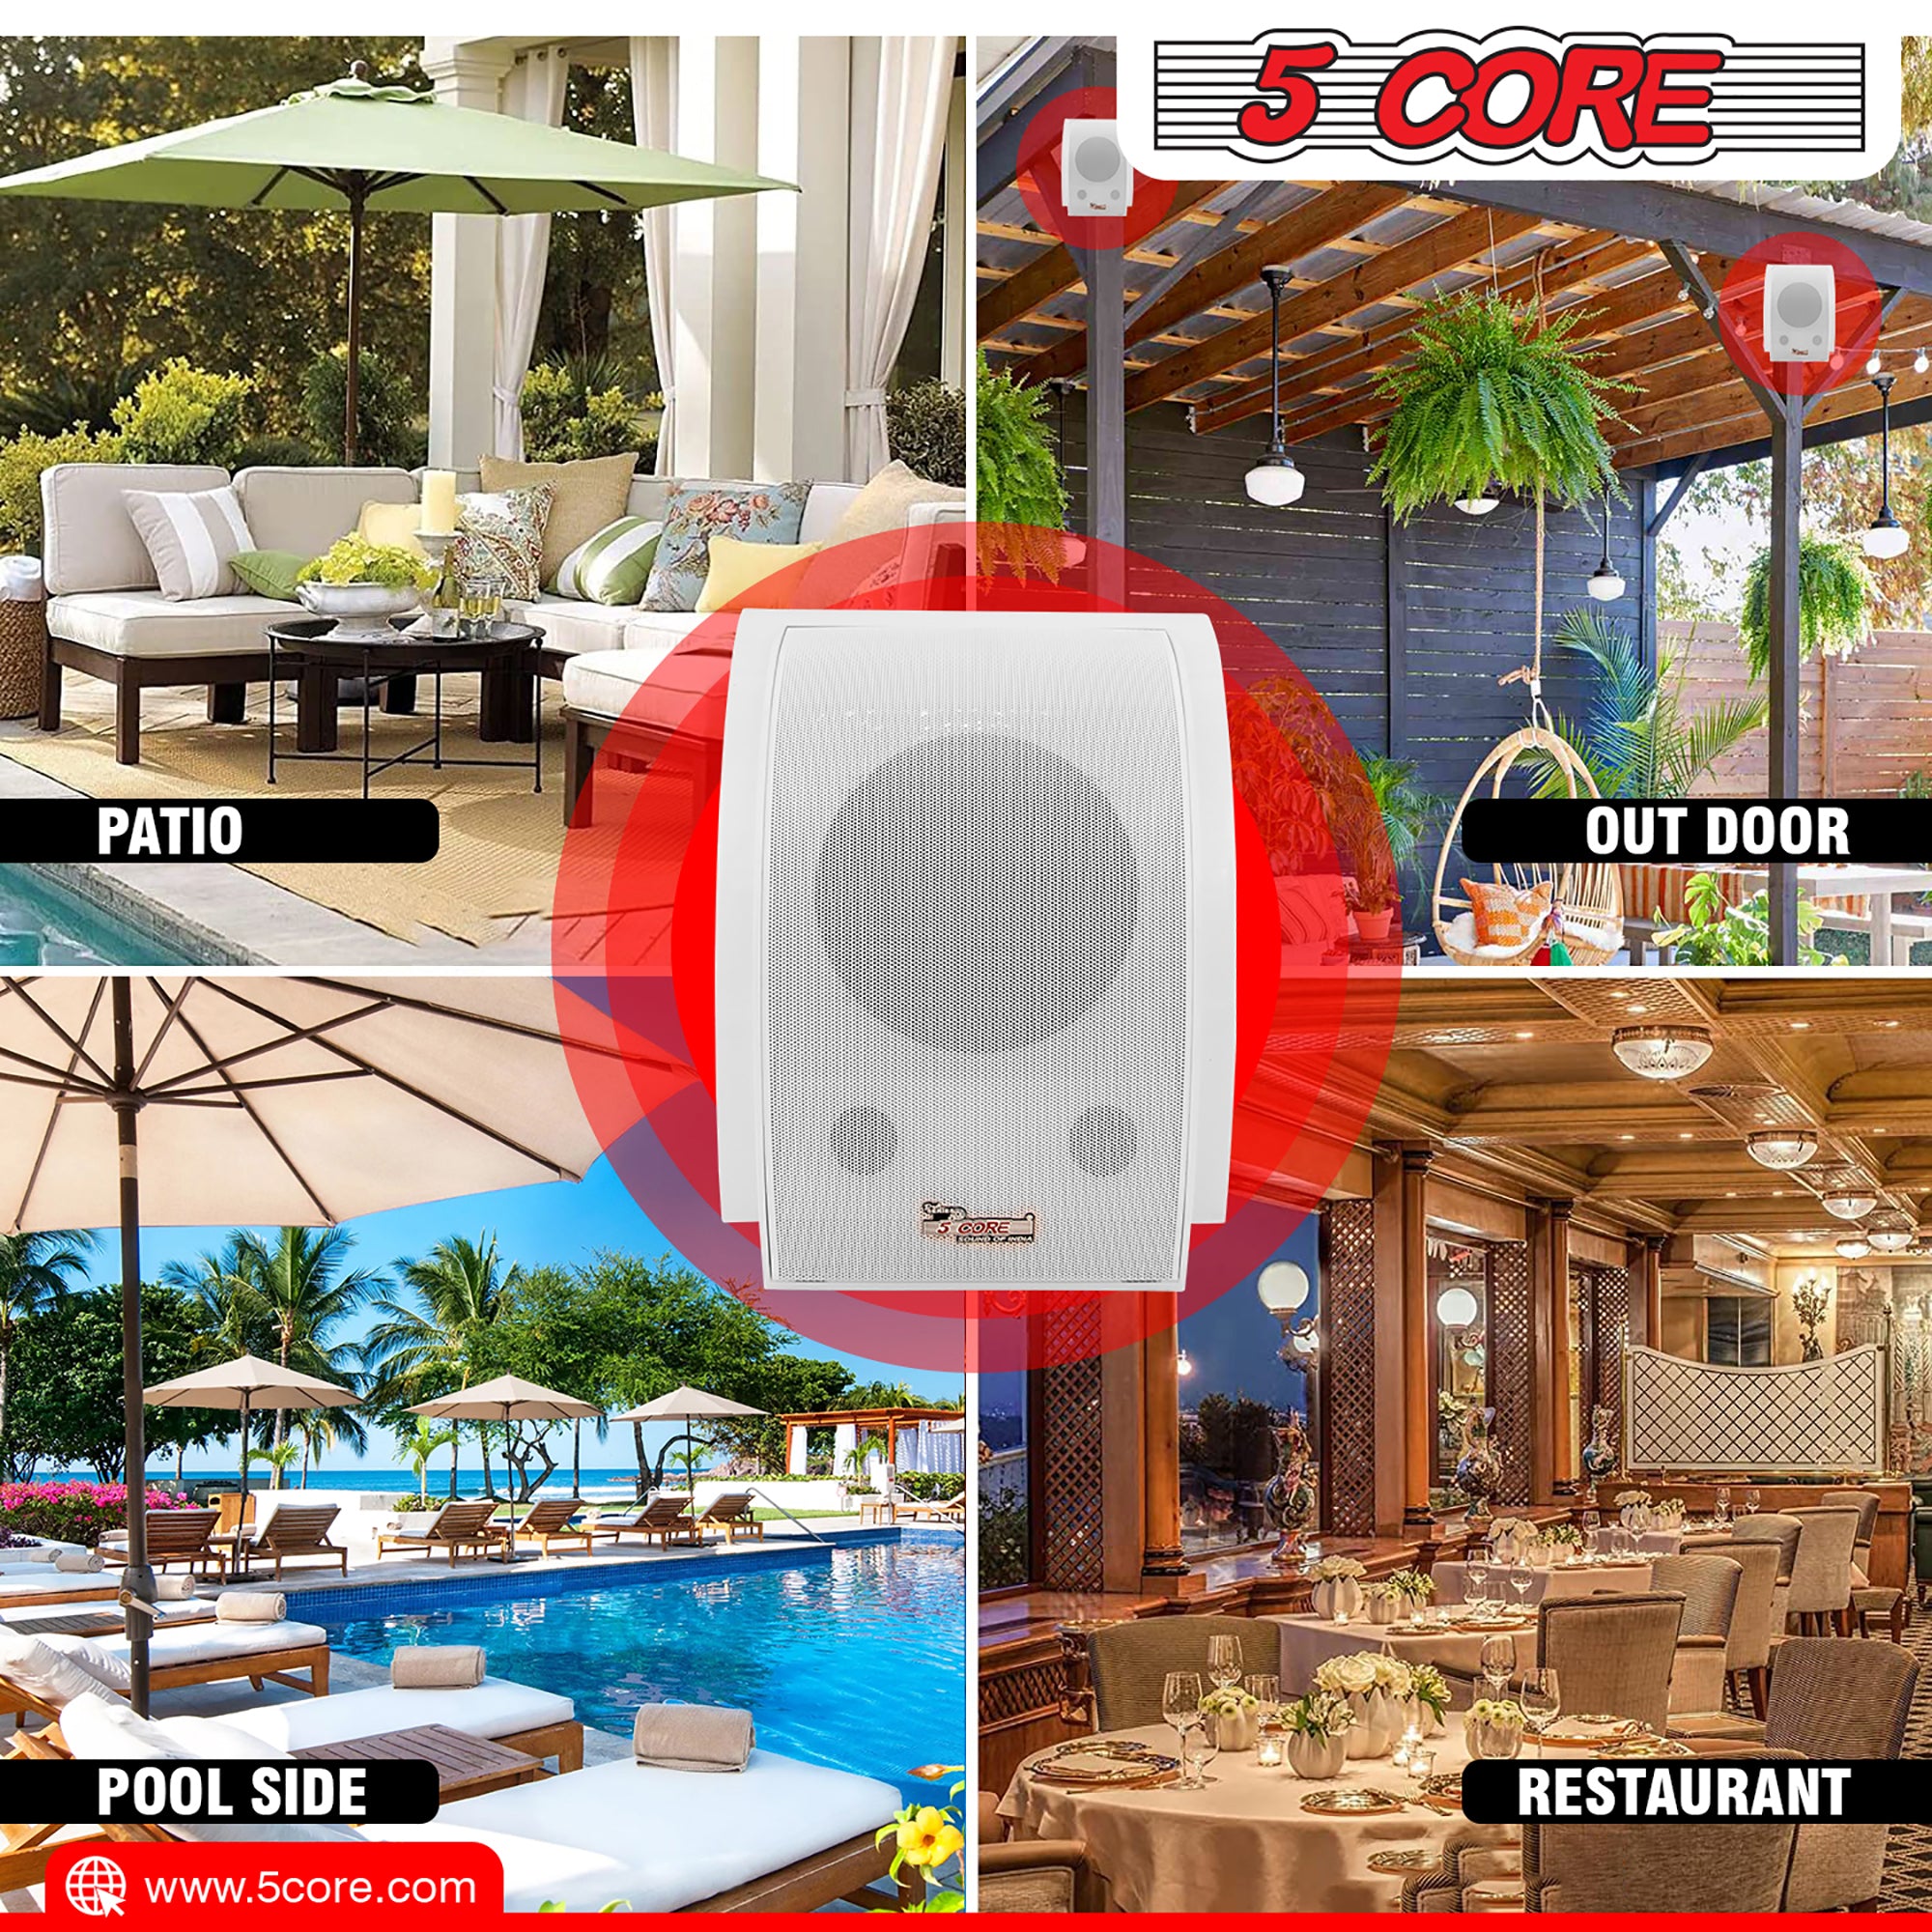 5 Core Wall Speaker 80W Max Power Indoor Outdoor Speakers White High Performance All Weather Wall Mount PA Speaker Wired Entertainment System for Patio Room Garage Restaurant Office - WS-11 6.5 2PCS